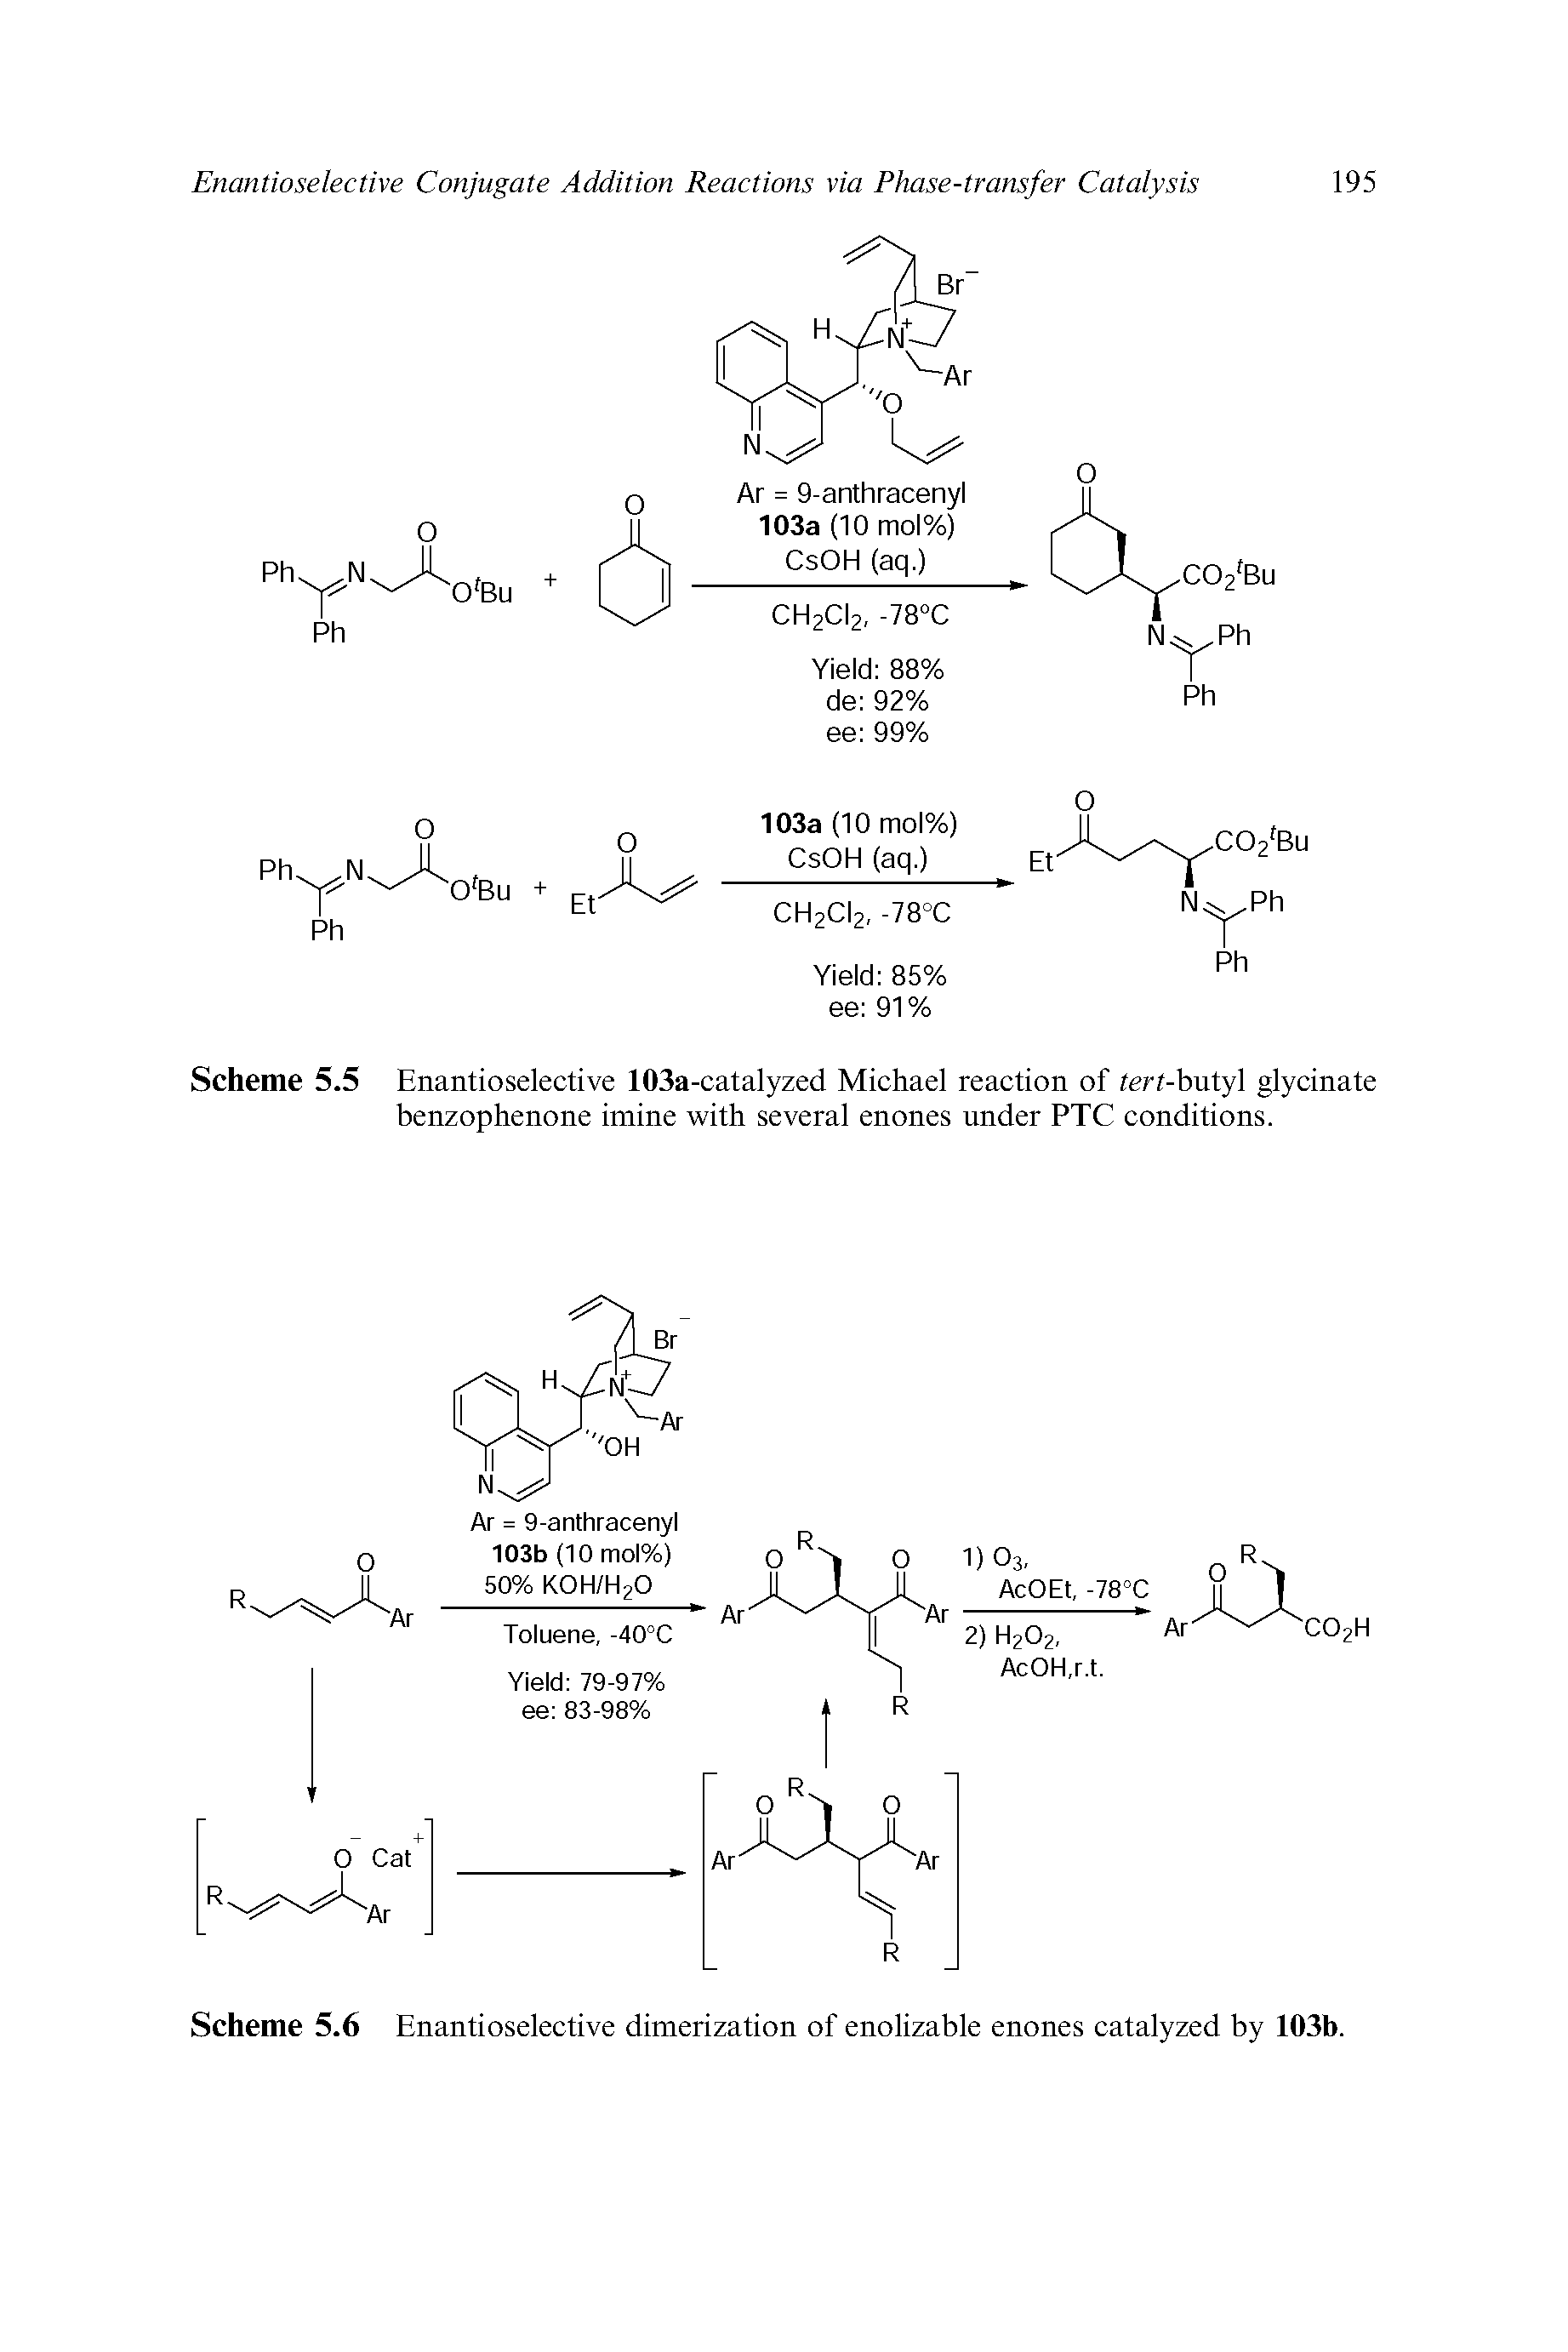 Scheme 5.5 Enantioselective 103a-catalyzed Michael reaction of tert-butyl glycinate benzophenone imine with several enones under PTC conditions.